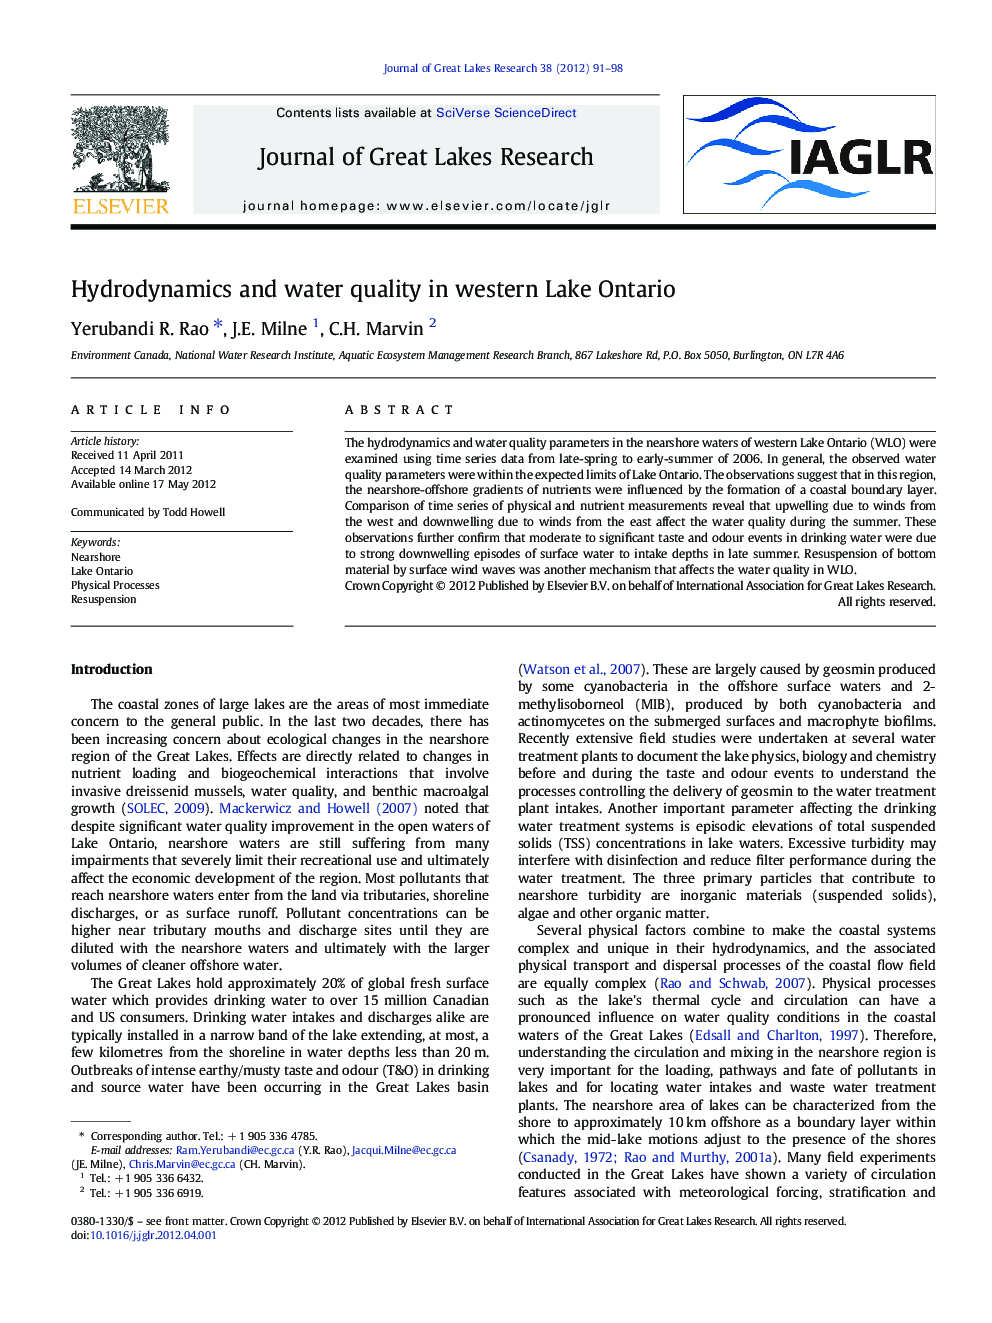 Hydrodynamics and water quality in western Lake Ontario